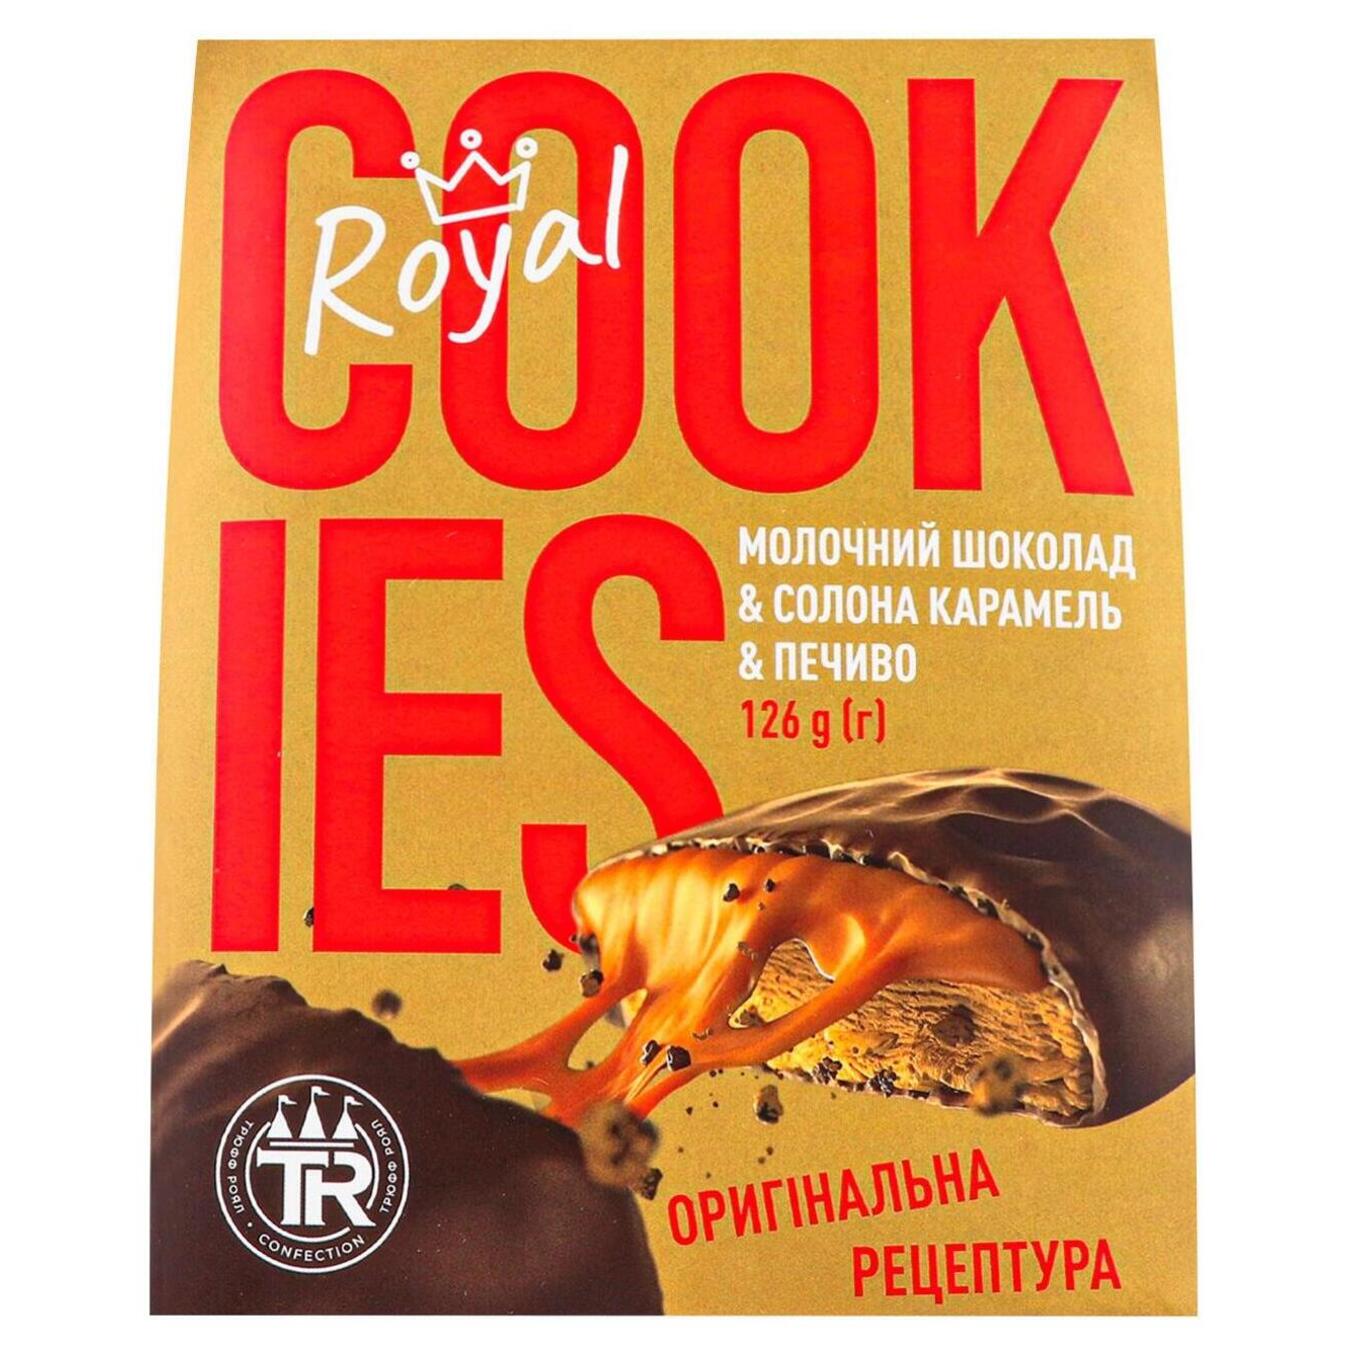 Truff Royal sugar cookies with salted caramel in milk chocolate 126g